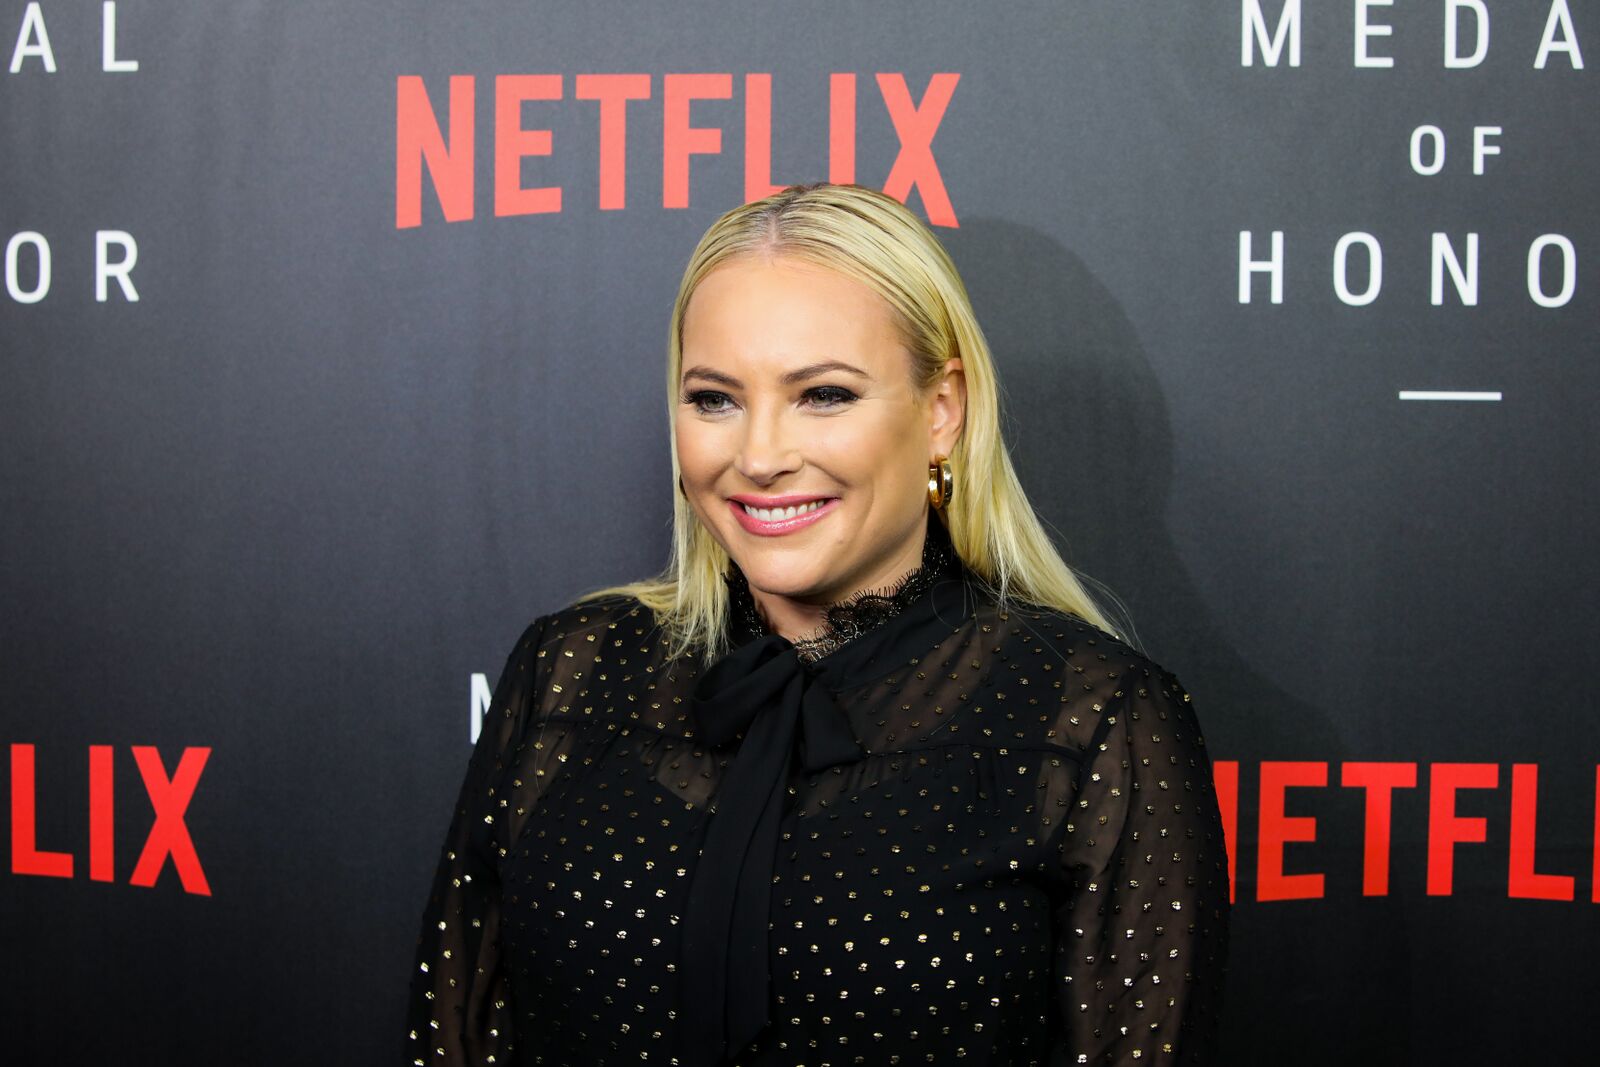 Meghan McCain at the Netflix 'Medal of Honor' screening and panel discussion at the US Navy Memorial Burke Theater on November 13, 2018 in Washington, DC | Photo: Getty Images